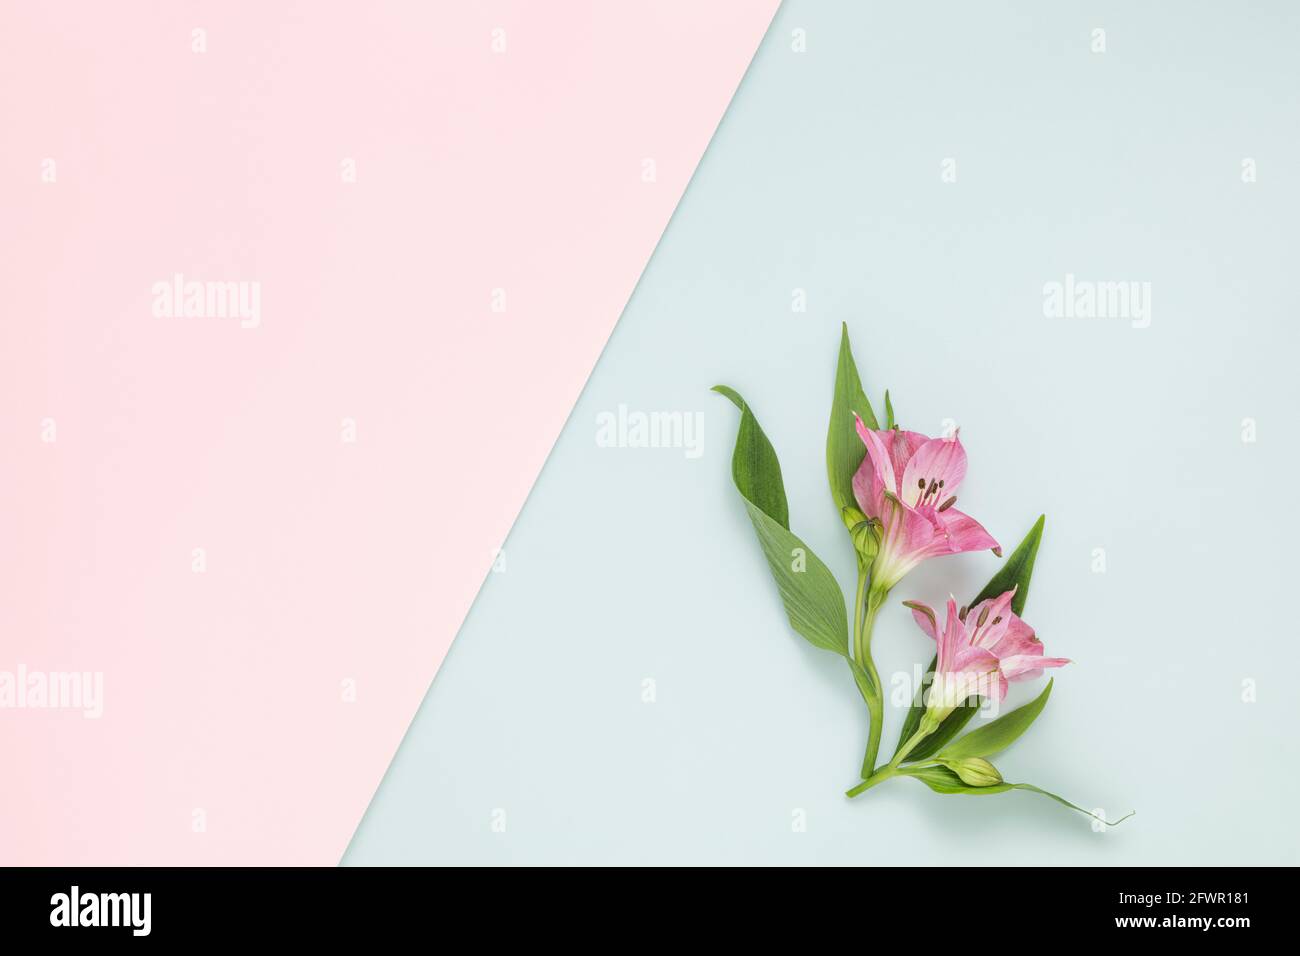 Alstroemerias on pink and light blue plain paper with copy space Stock Photo